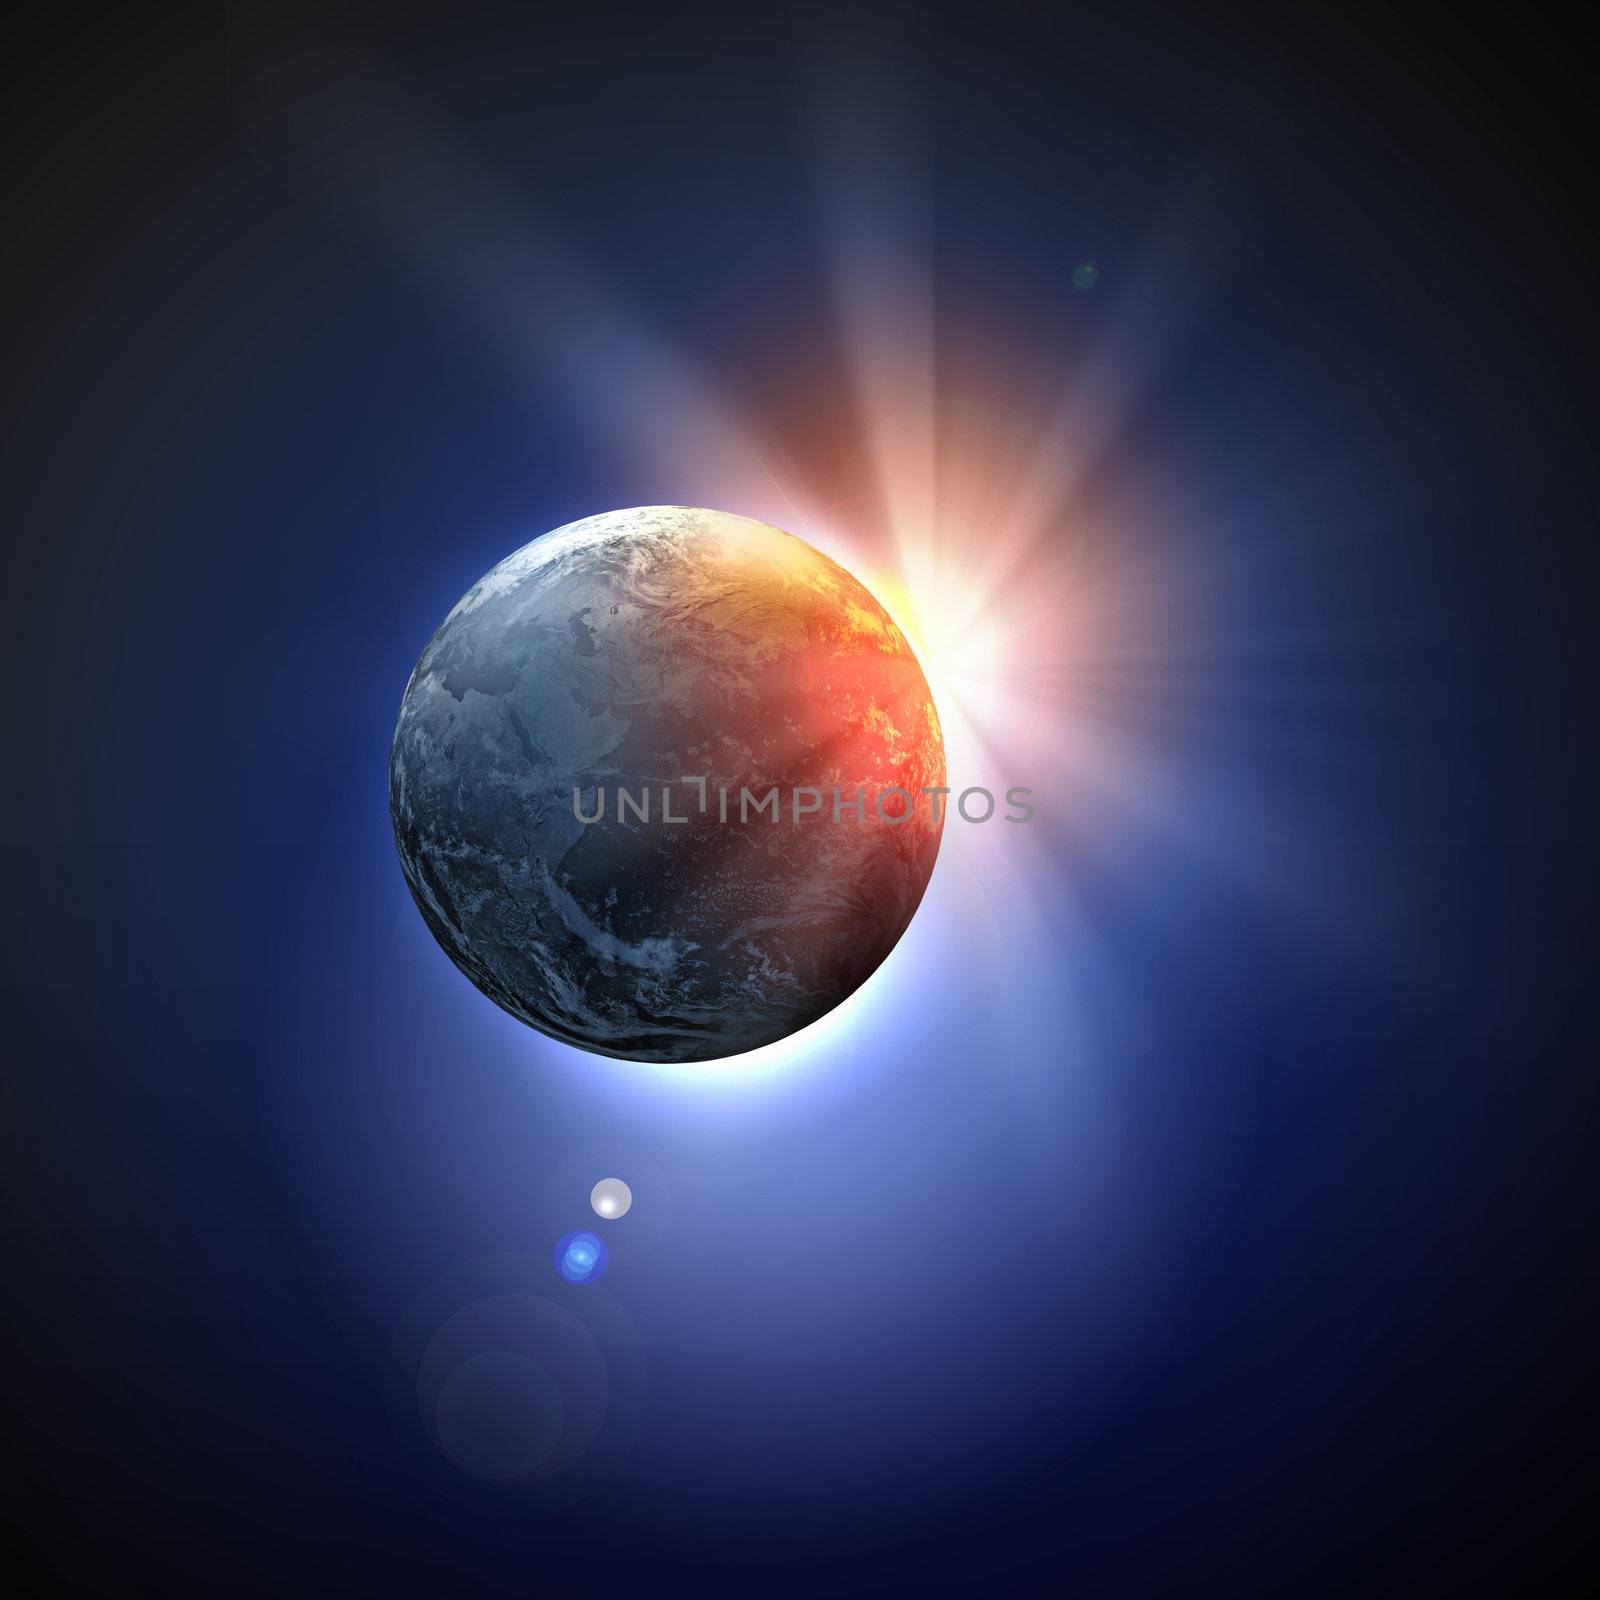 Image of earth planet in space by sergey_nivens